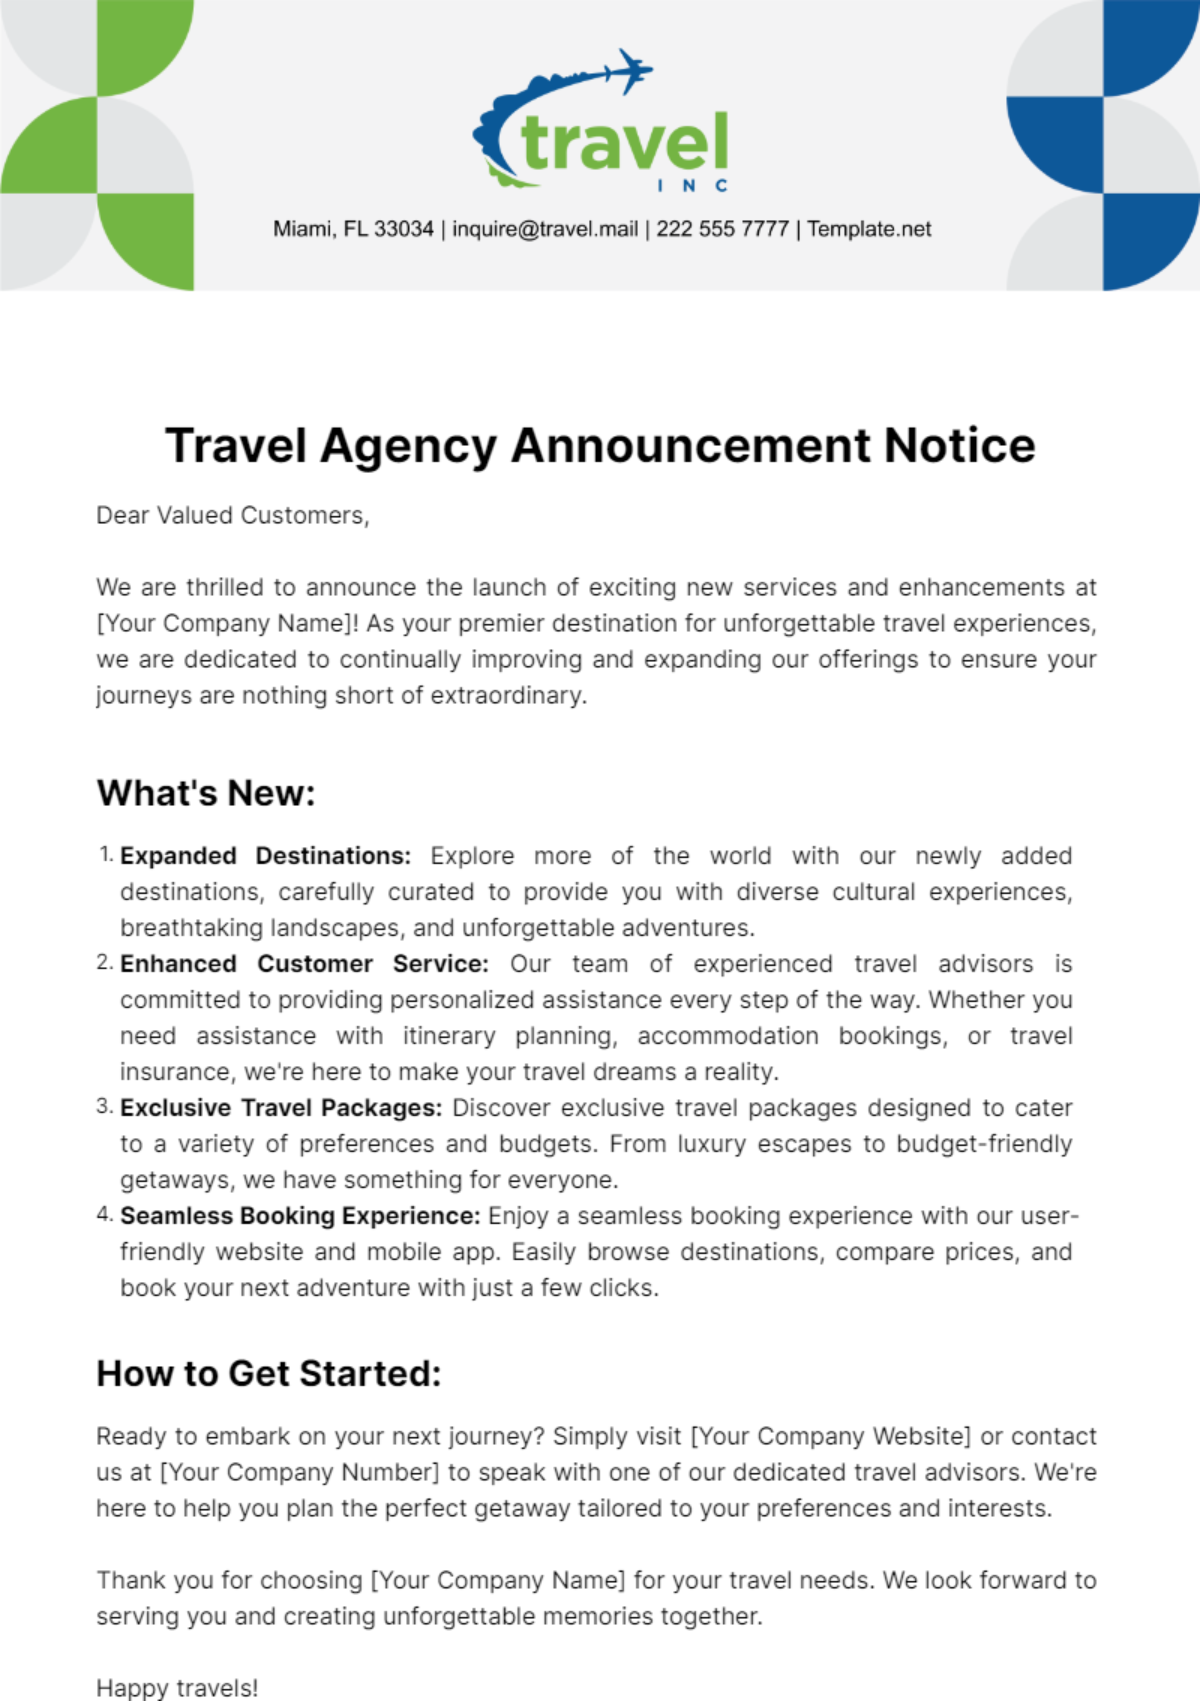 Free Travel Agency Announcement Notice Template